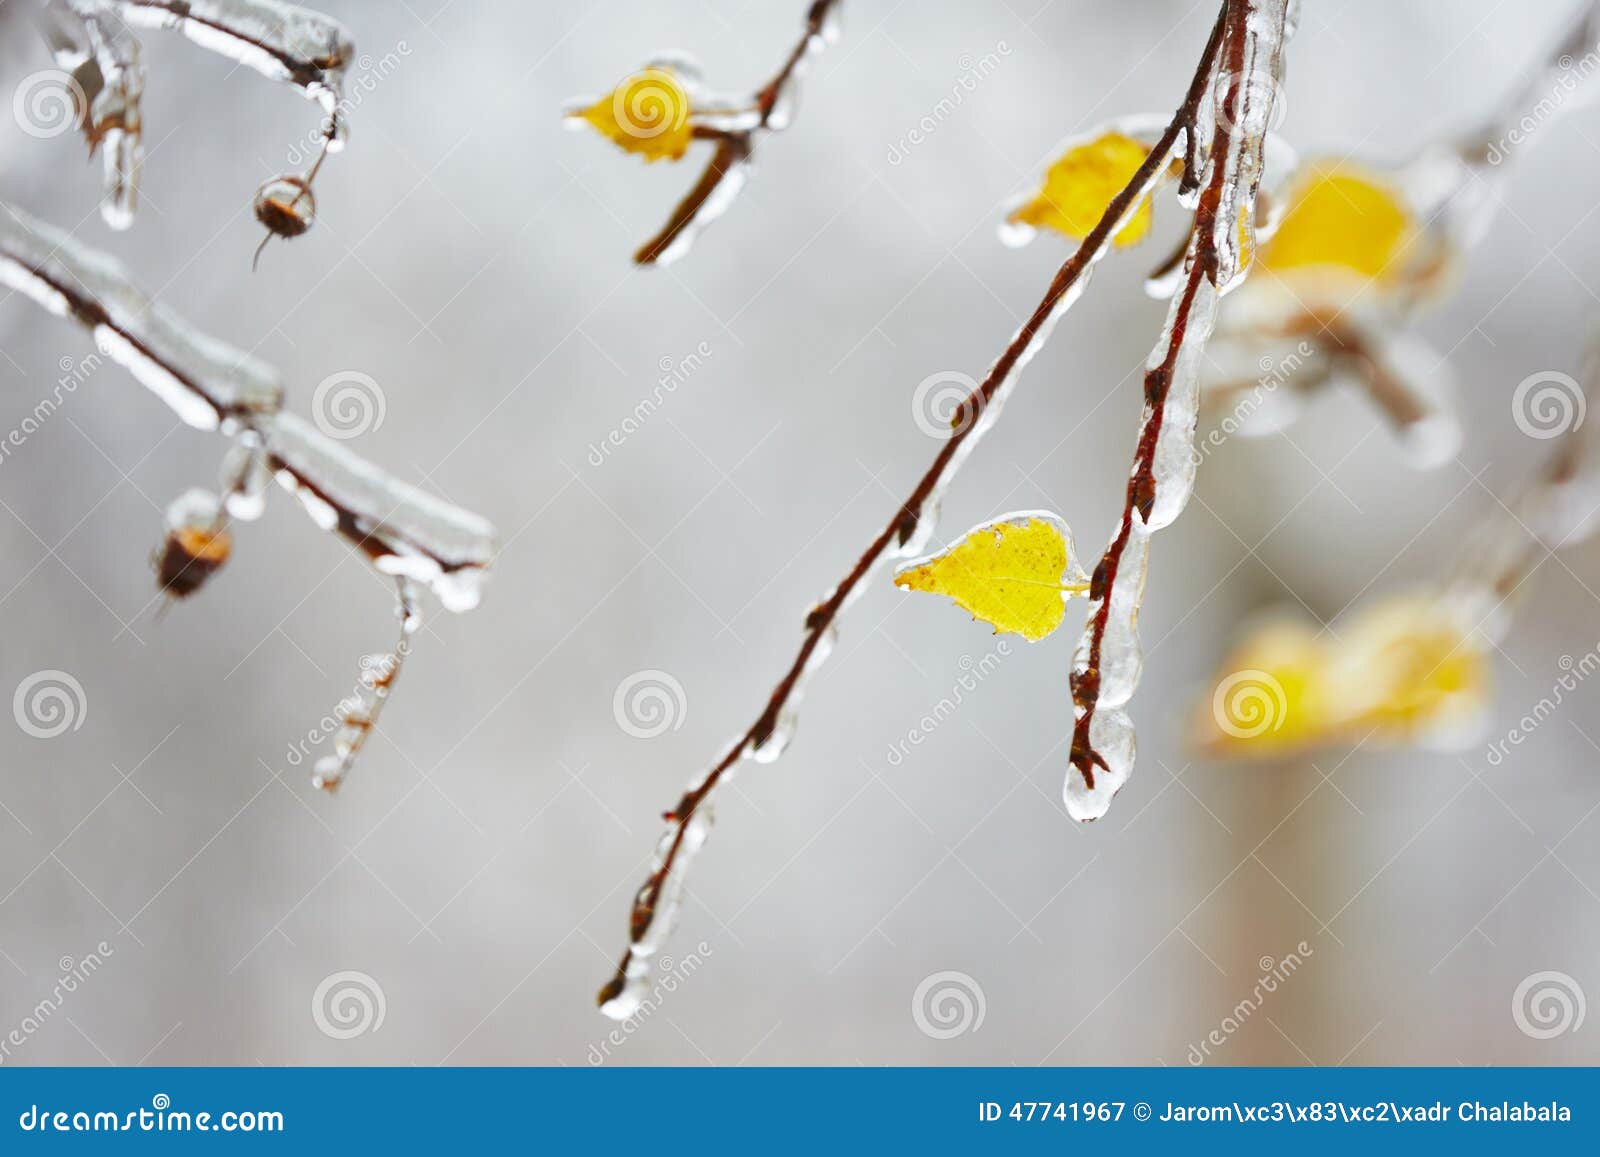 Icy rain stock image. Image of cool, covered, storm, iciness - 47741967